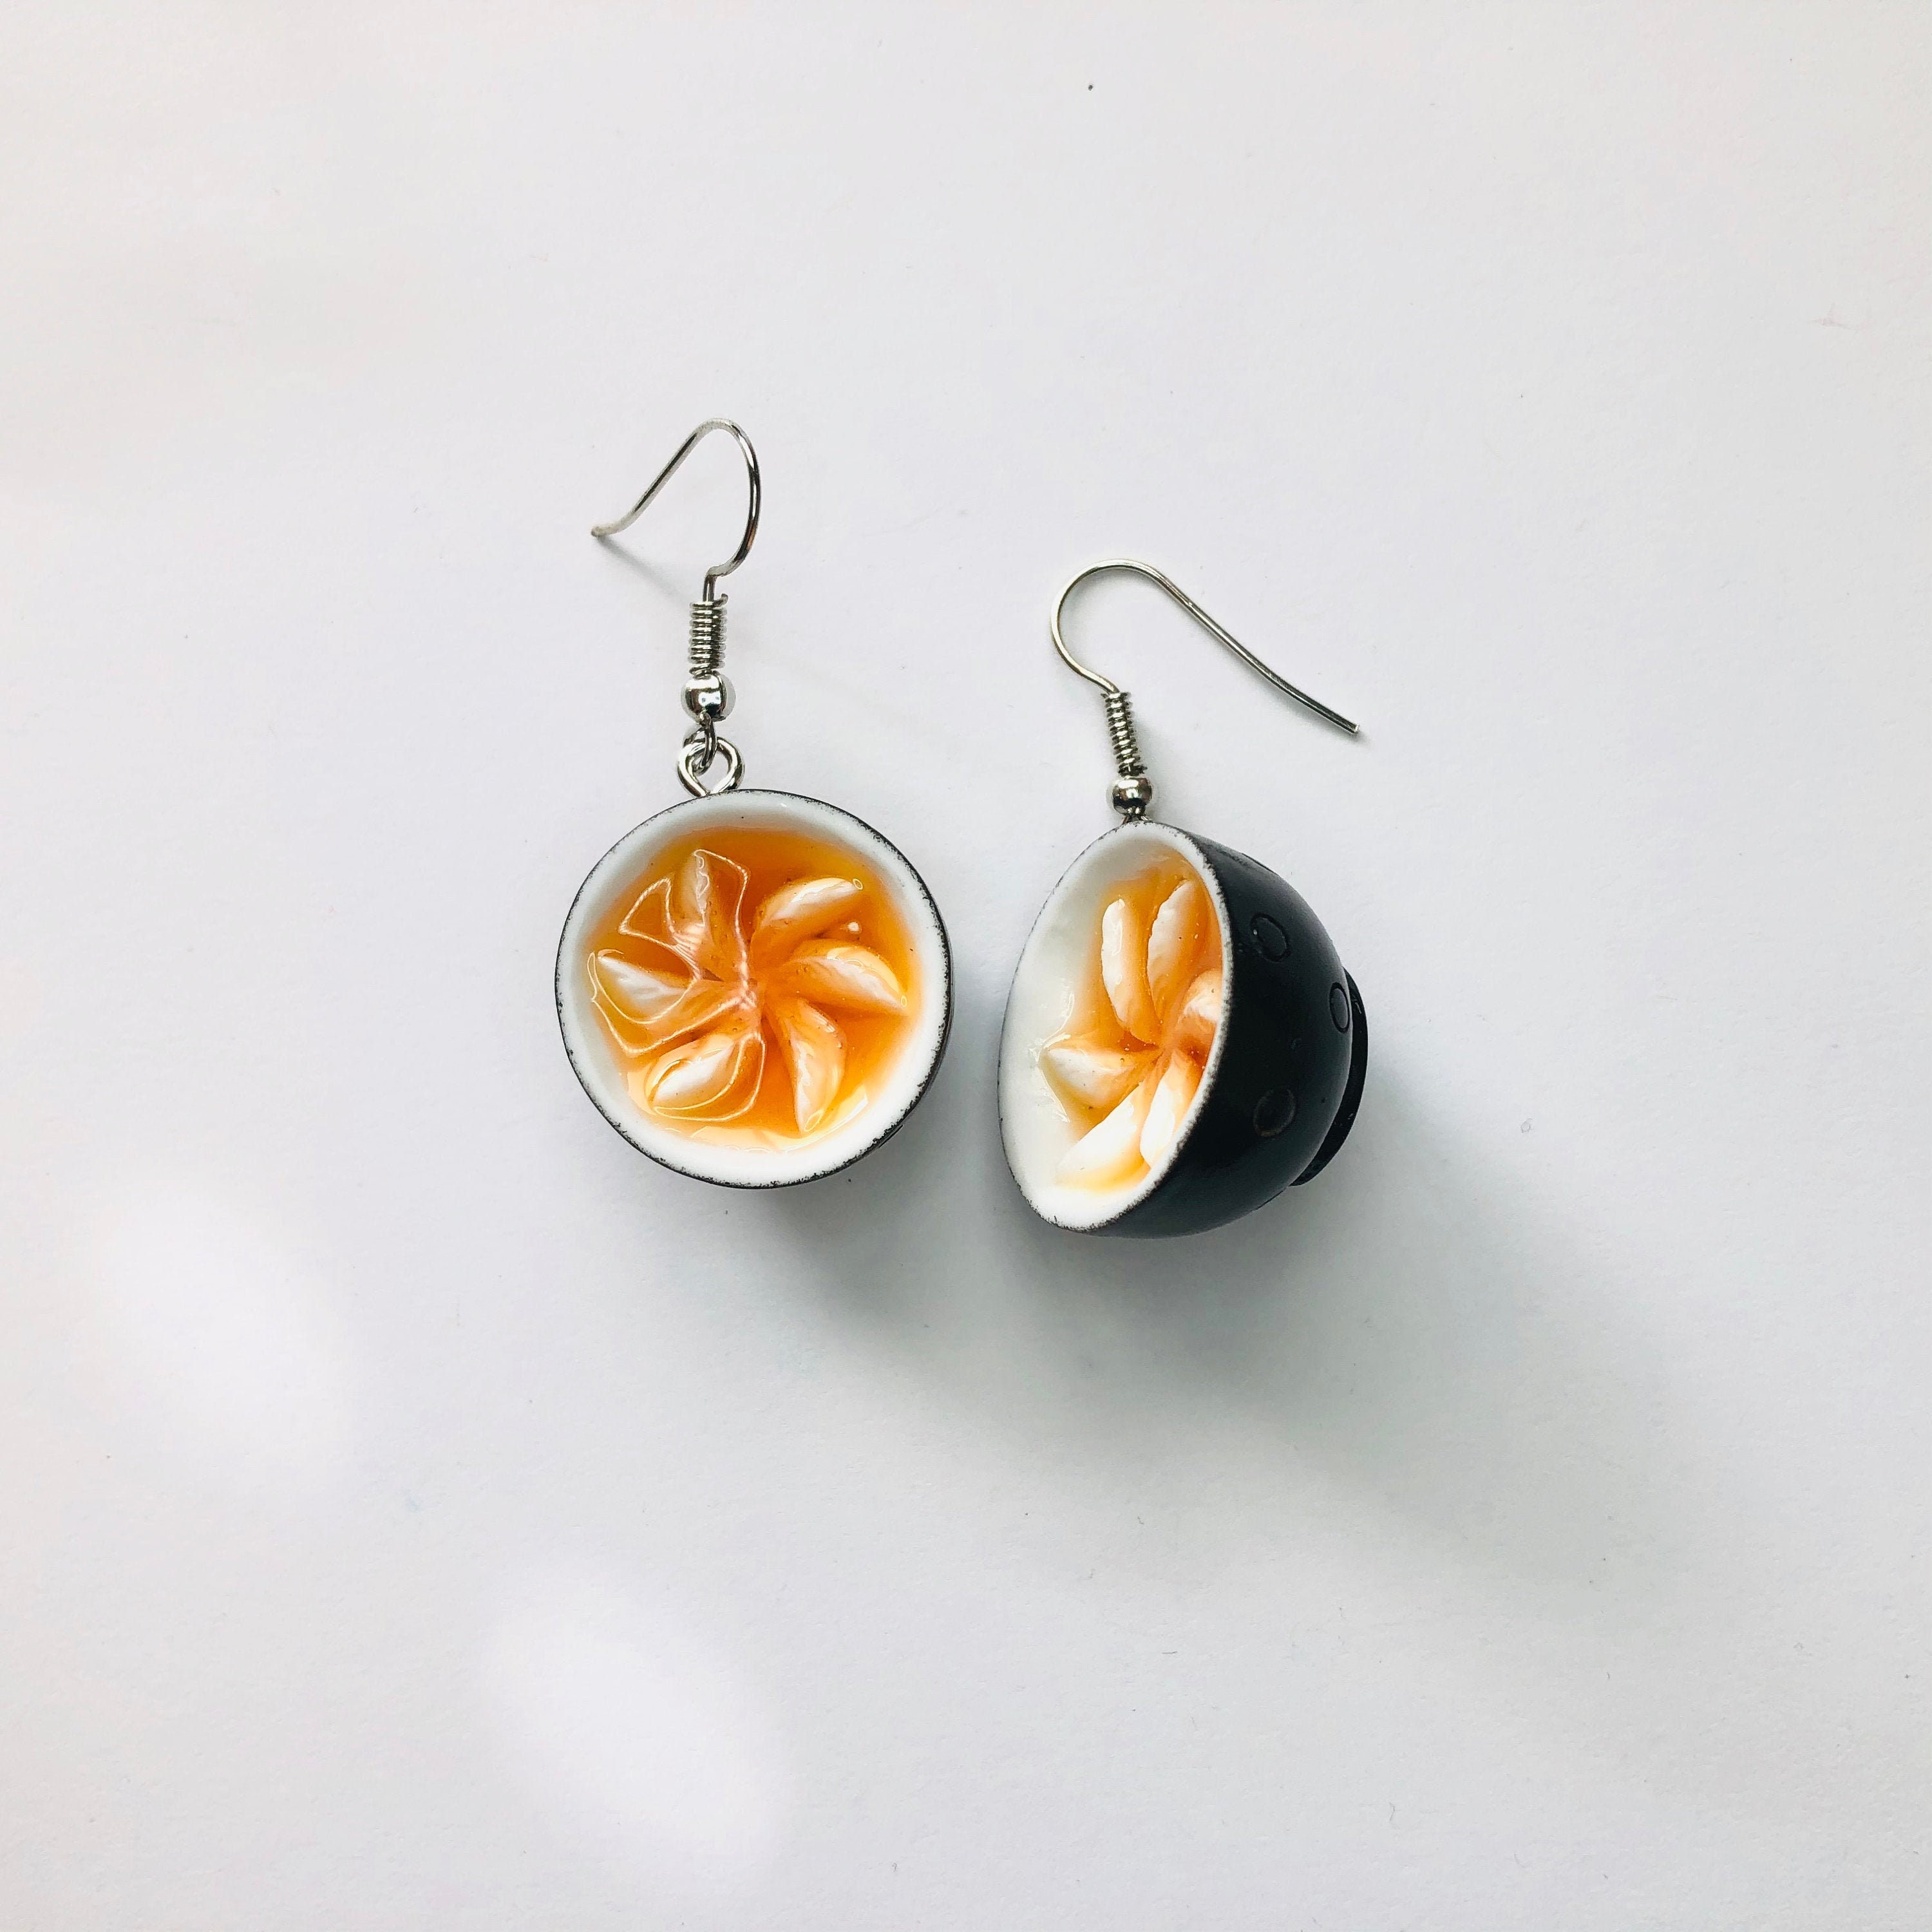 Adorable Large Delicious Bowl Of Dumplings Chinese Food Ramen Simulation Earrings Dangle Cartoon Jewelry Lover A1041